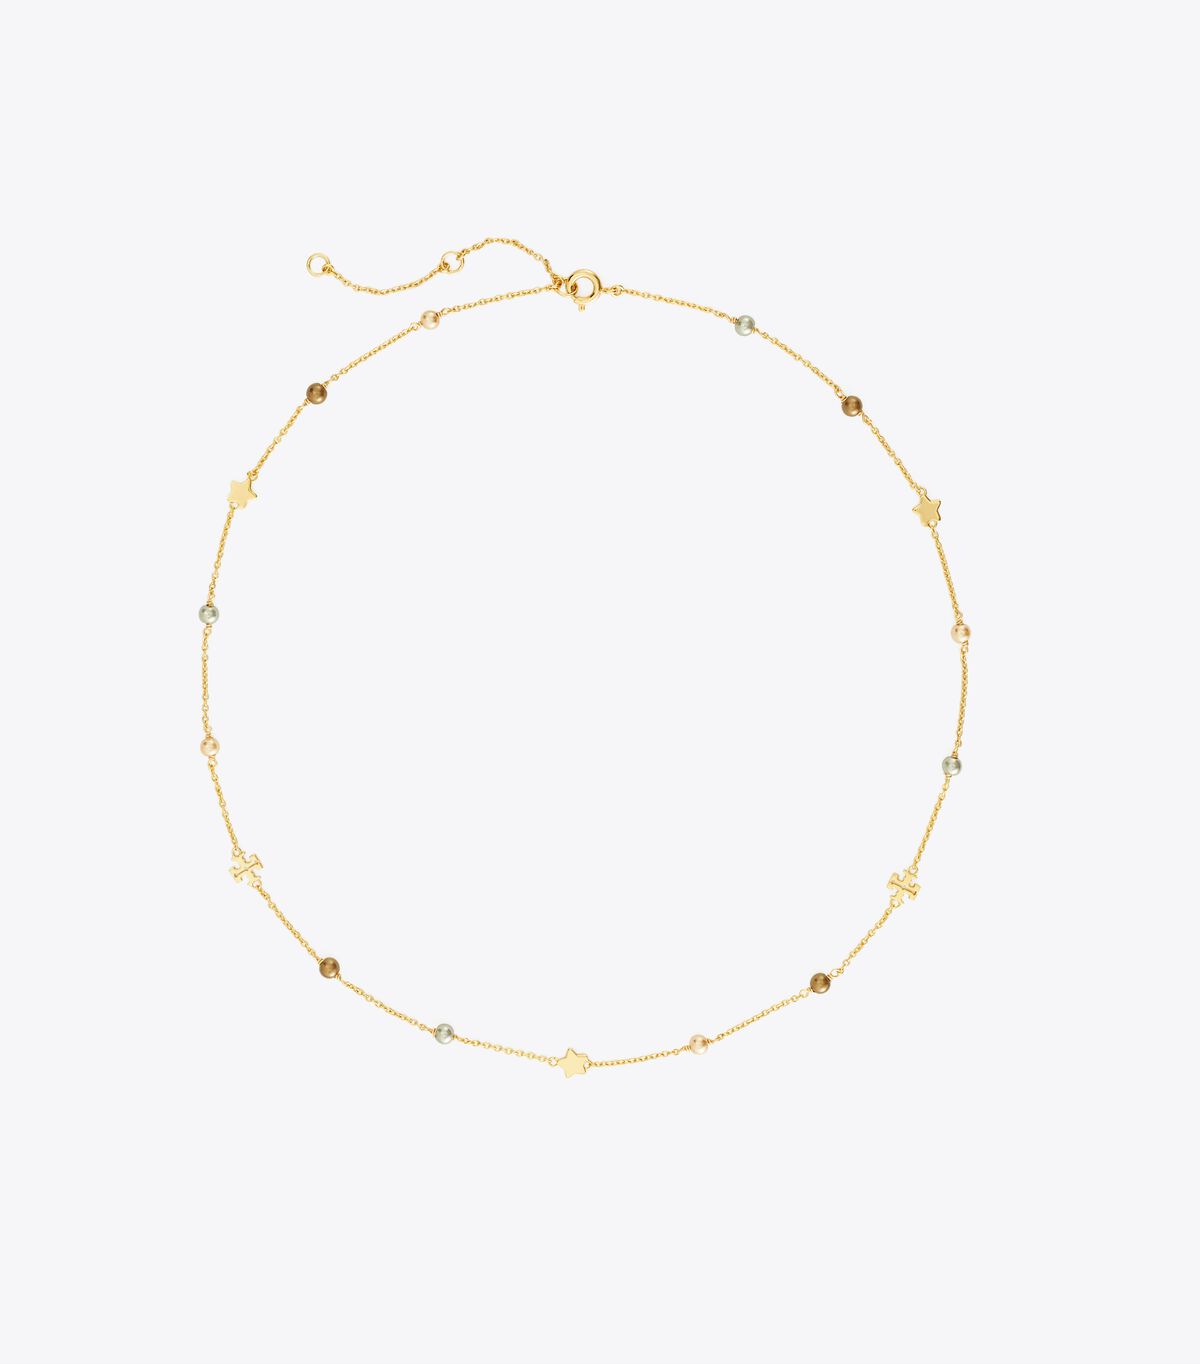 Delicate Kira Pearl Necklace